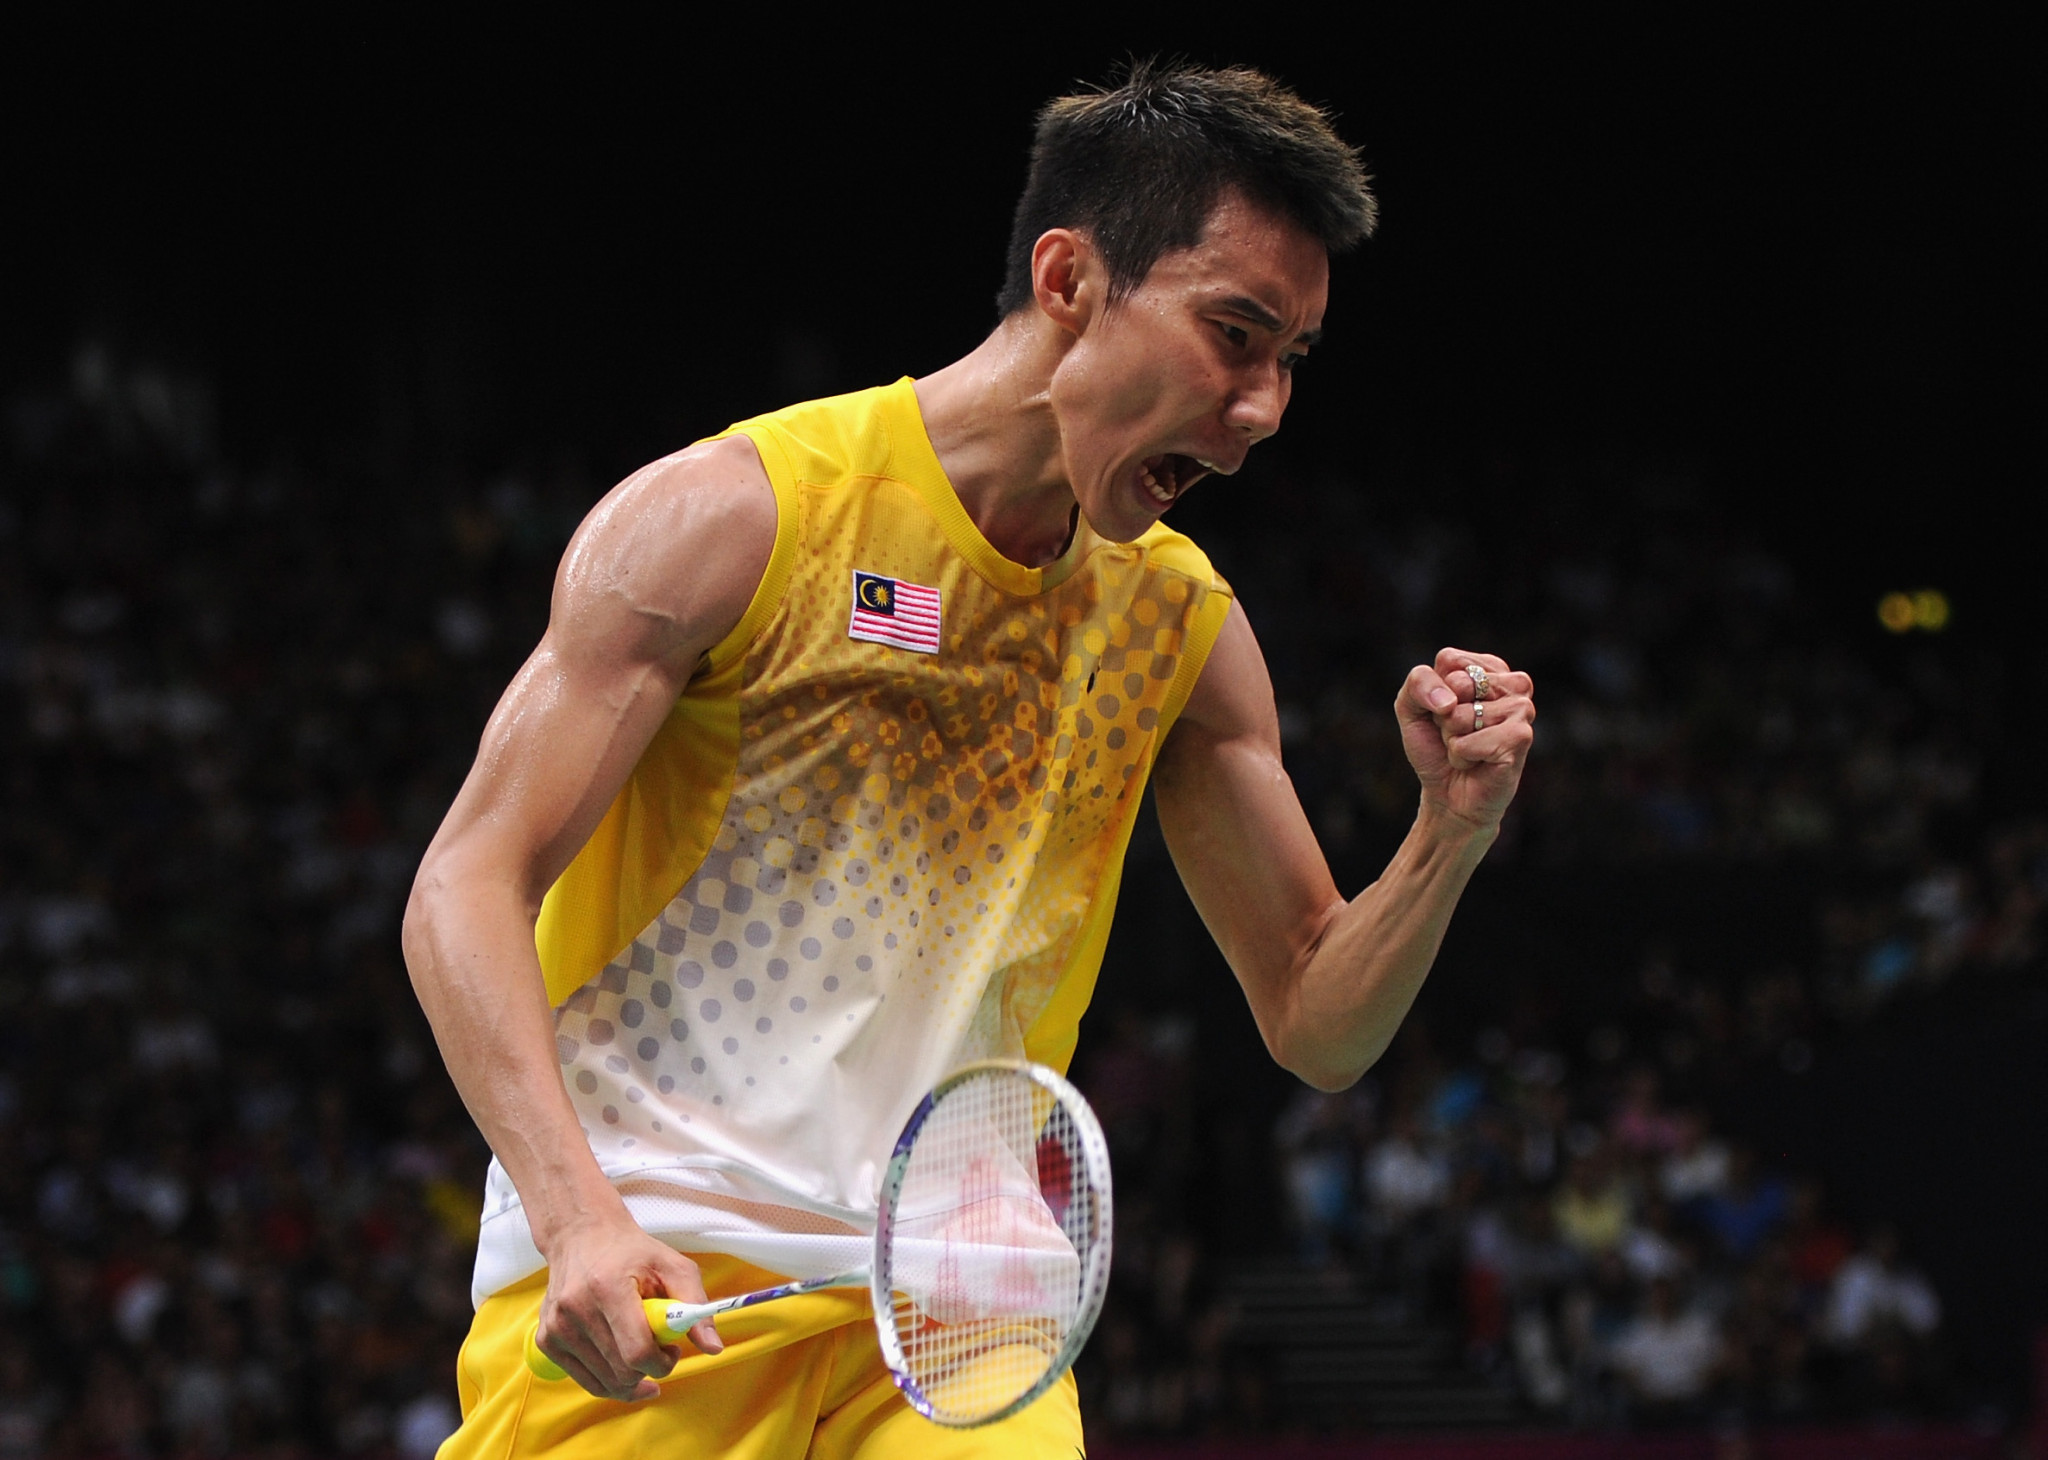 Badminton player Lee Chong Wei won three silver medals in a row at the Olympics with Malaysia still without a gold ©Getty Images